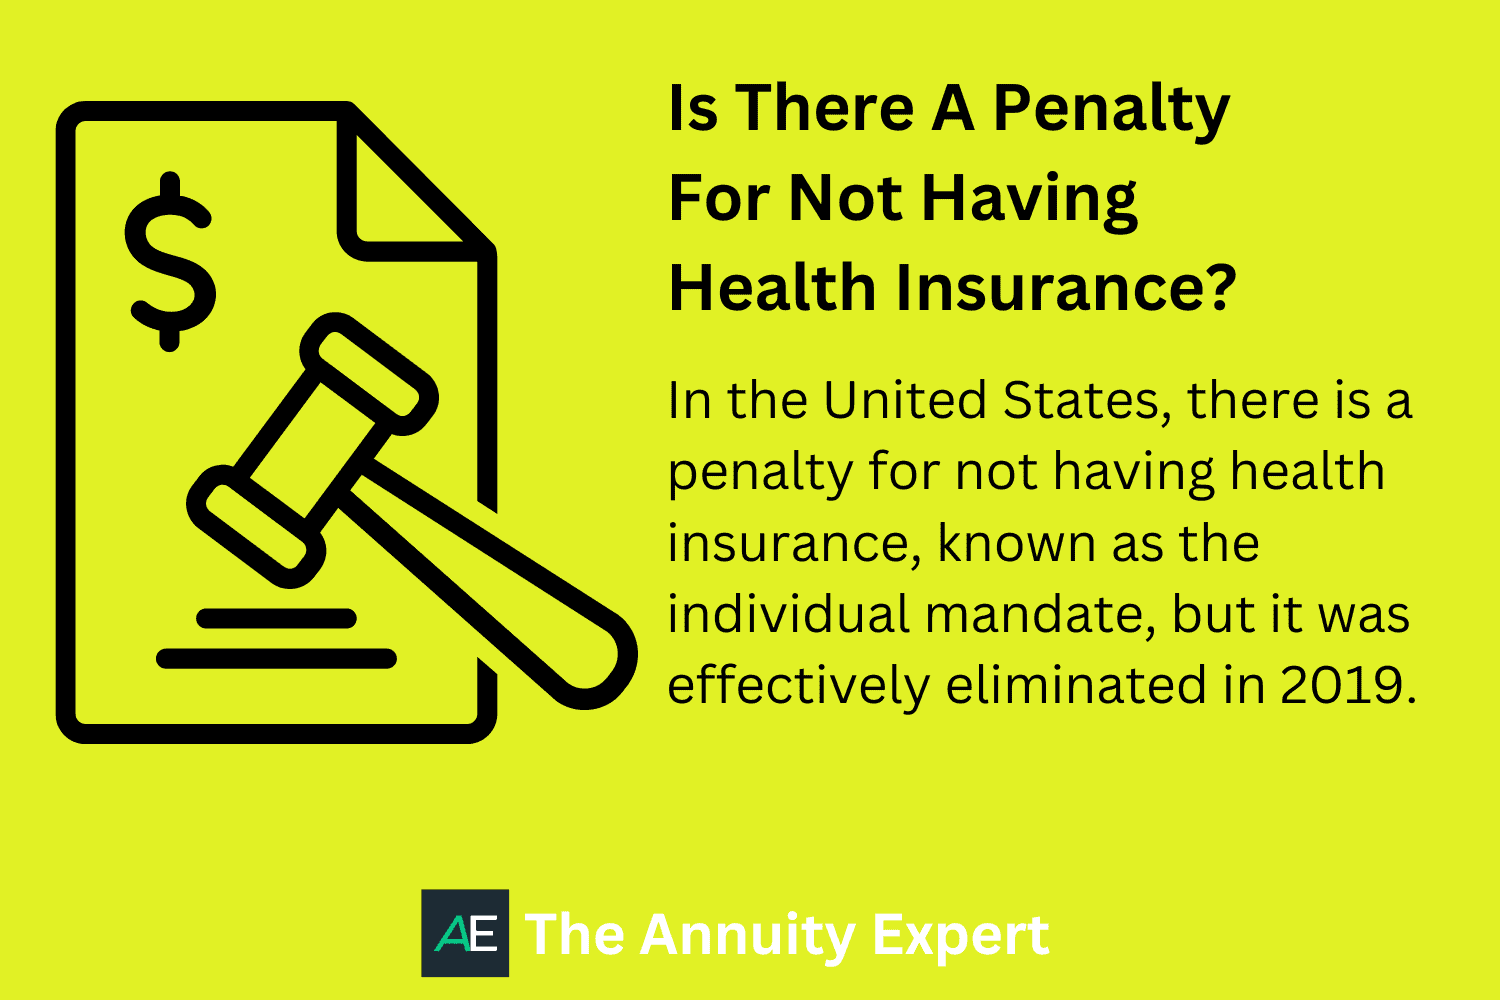 what is the penalty for not having health insurance?